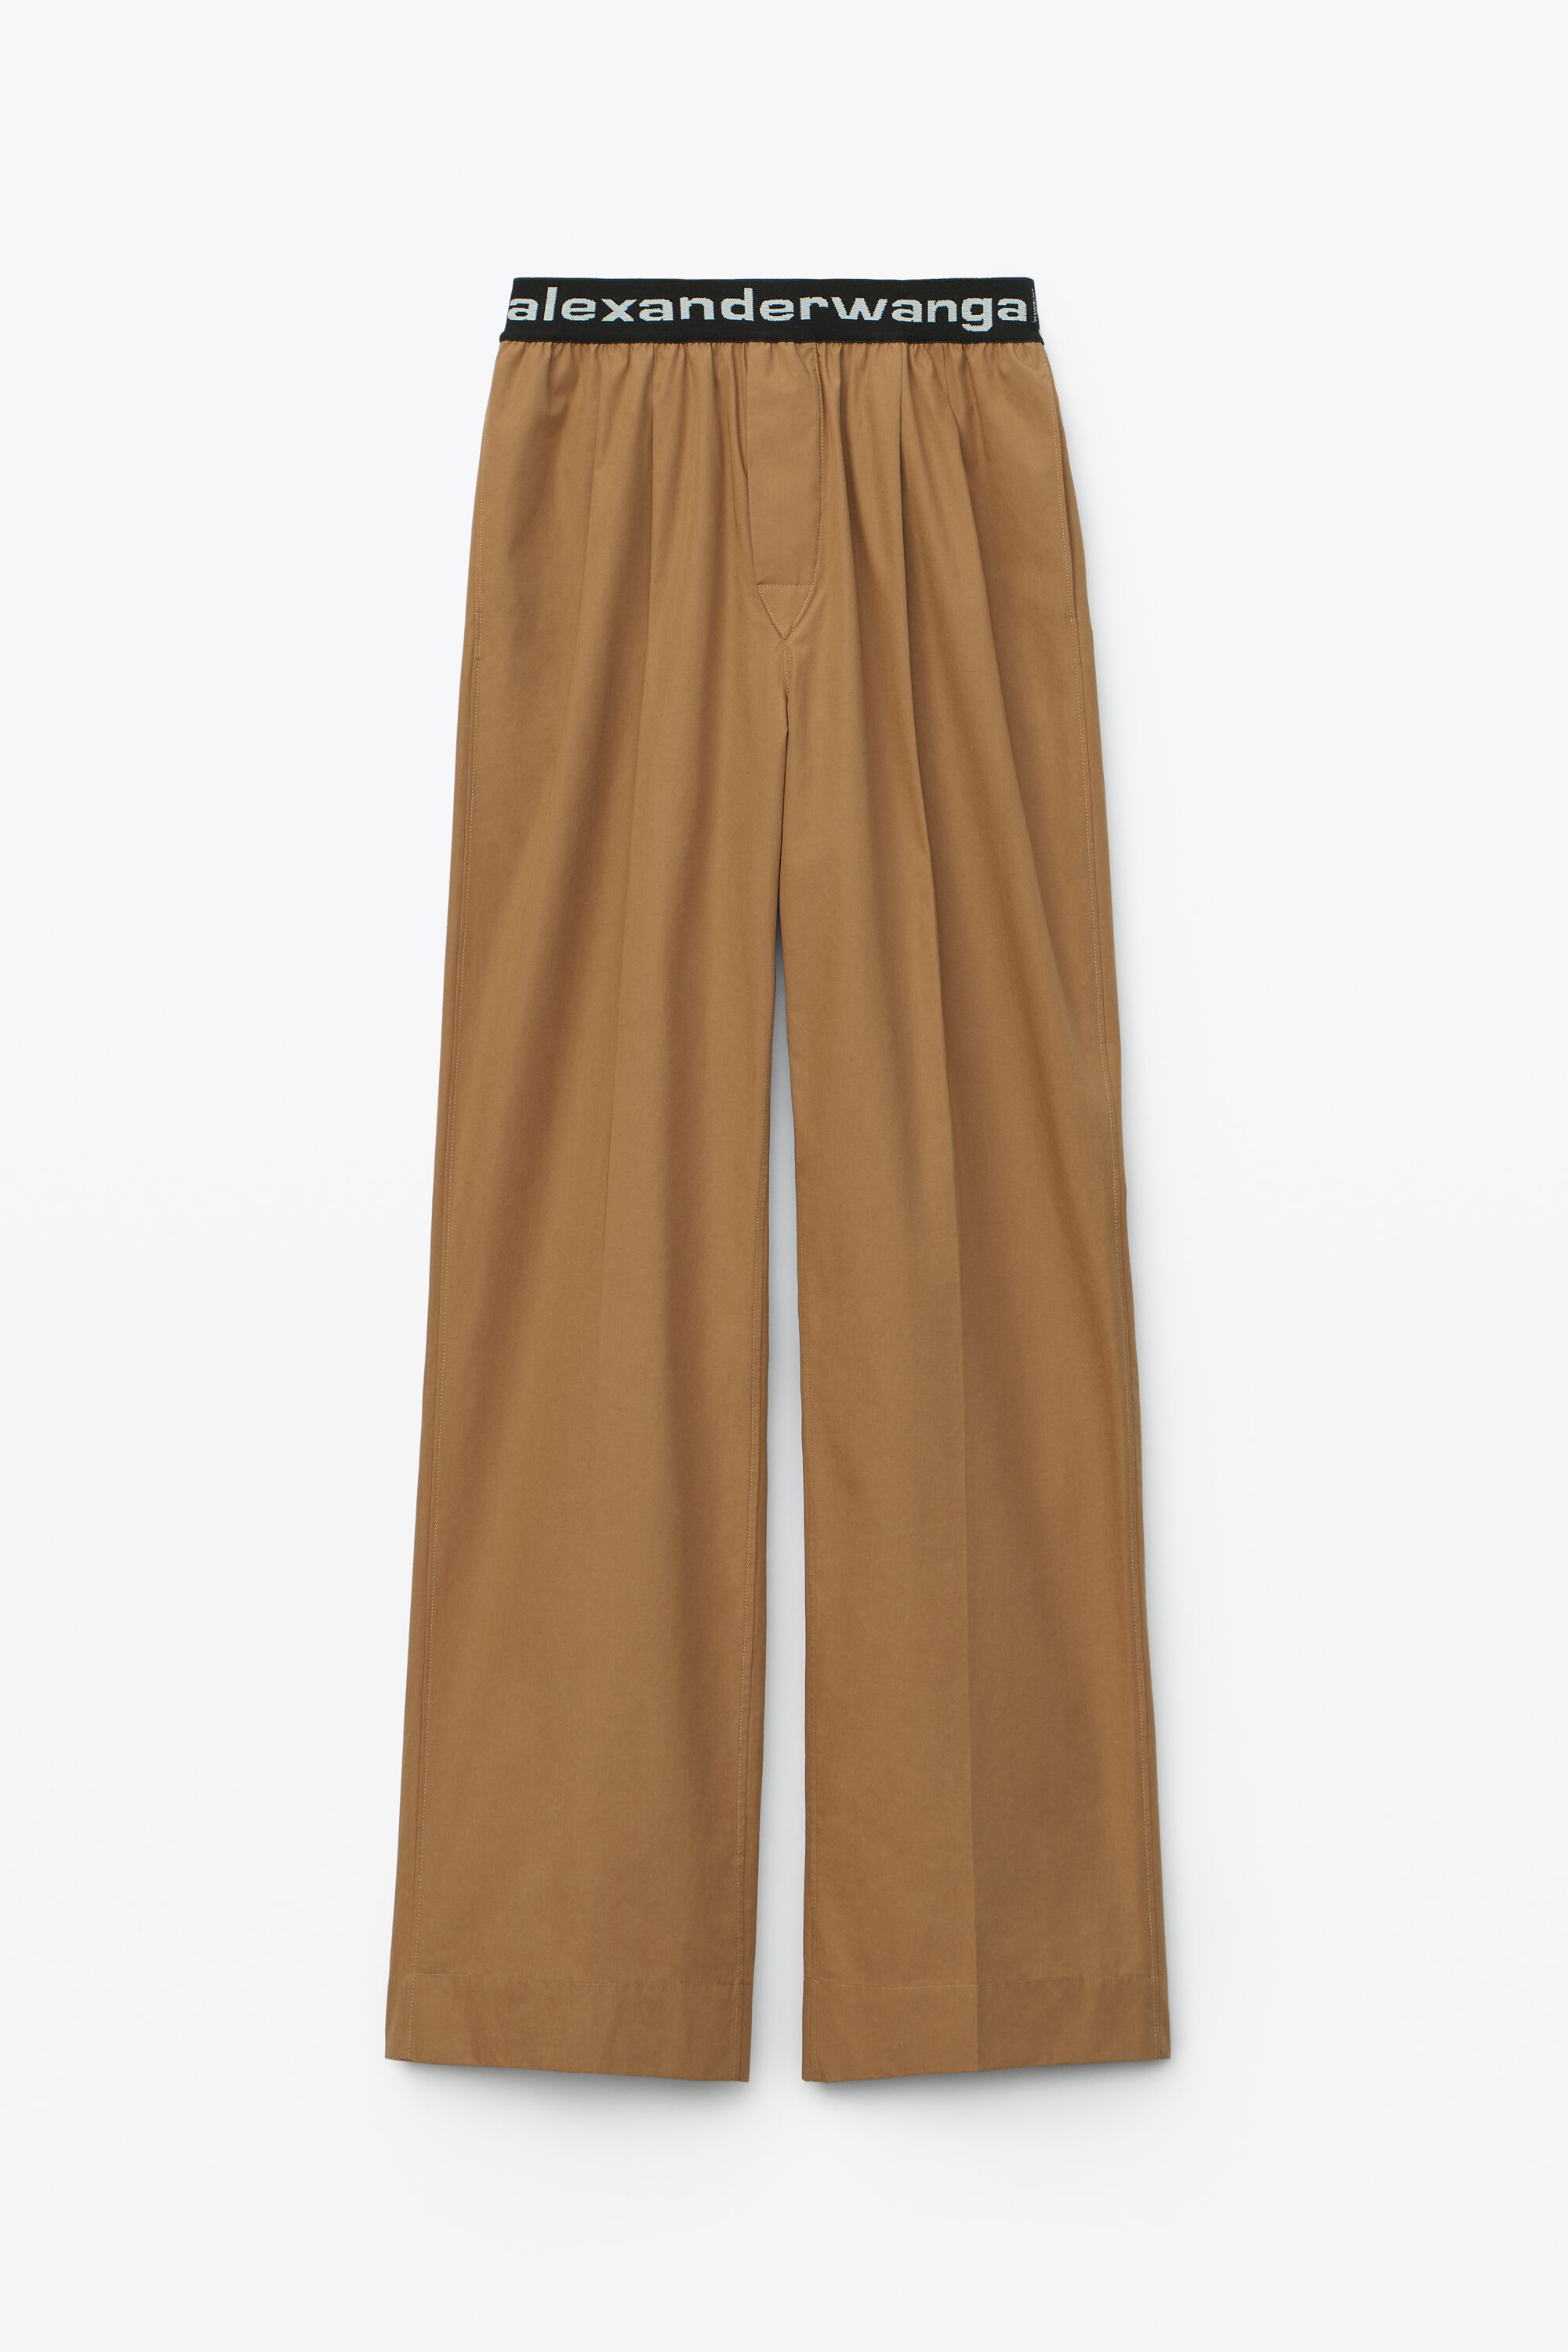 alexander wang pleated jeans